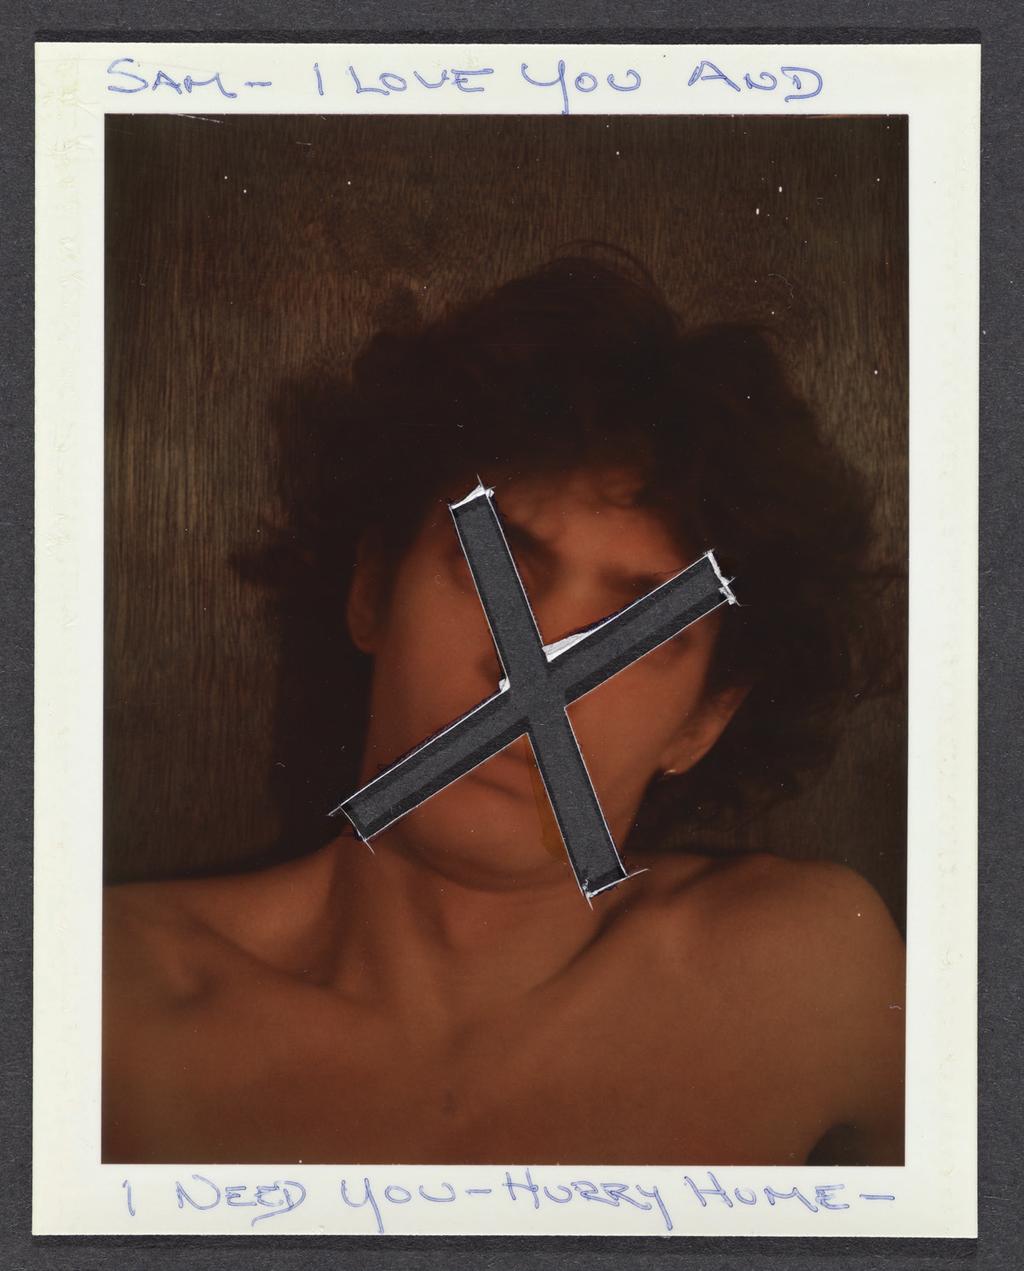 Rediscovering Robert Plate 11. Robert, Untitled ( Sam I love you and I need you hurry home ), 1974, altered color Polaroid print. Gift of The Robert Foundation to the J.